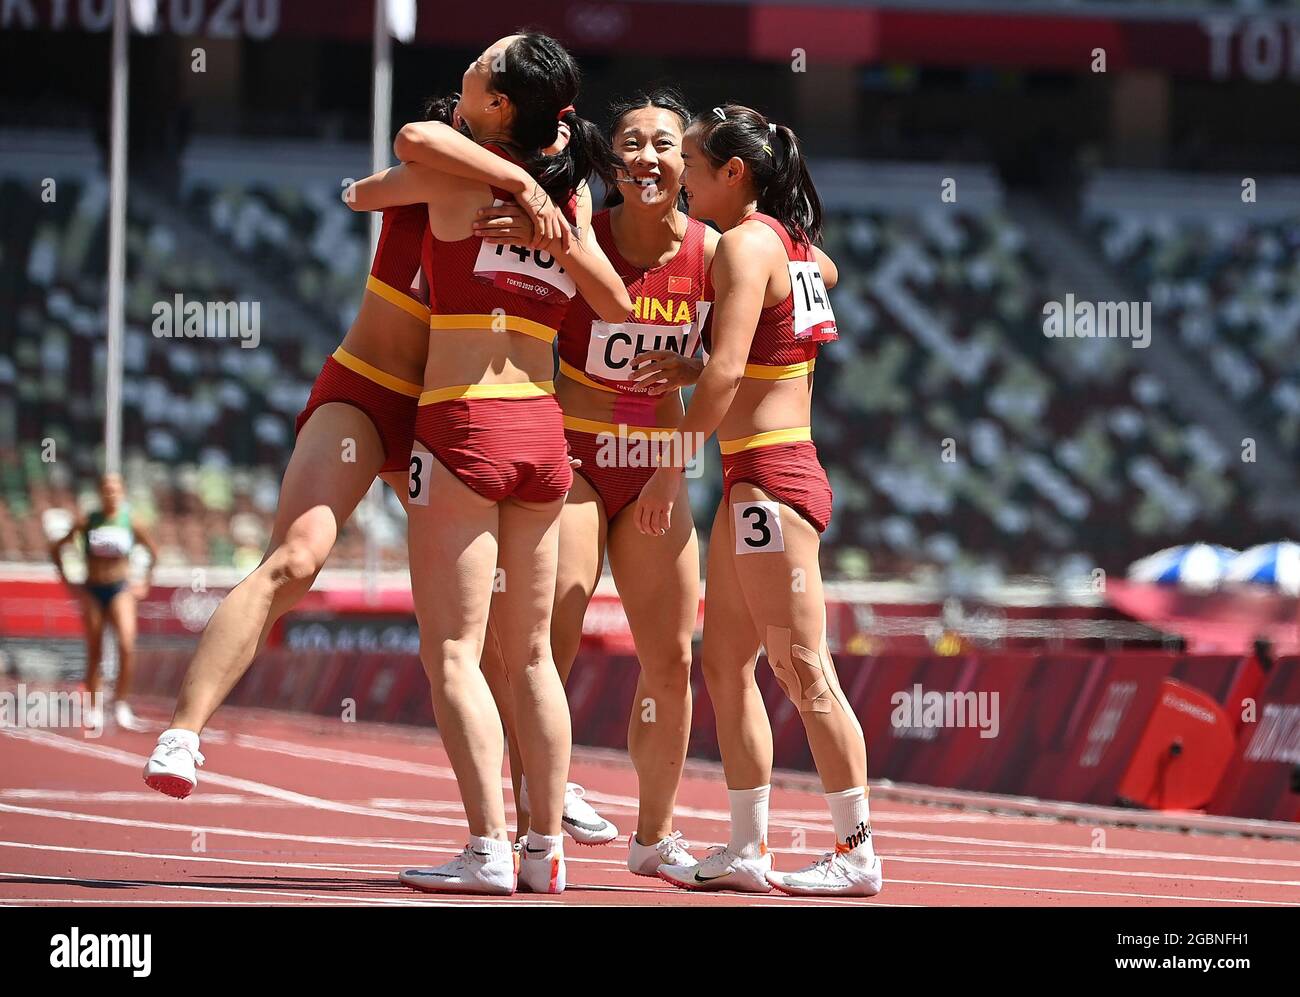 Tokyo, Japan. 5th Aug, 2021. Team China reacts during the women's 4x100m relay heats at Tokyo 2020 Olympic Games, in Tokyo, Japan, Aug. 5, 2021. Credit: Jia Yuchen/Xinhua/Alamy Live News Stock Photo